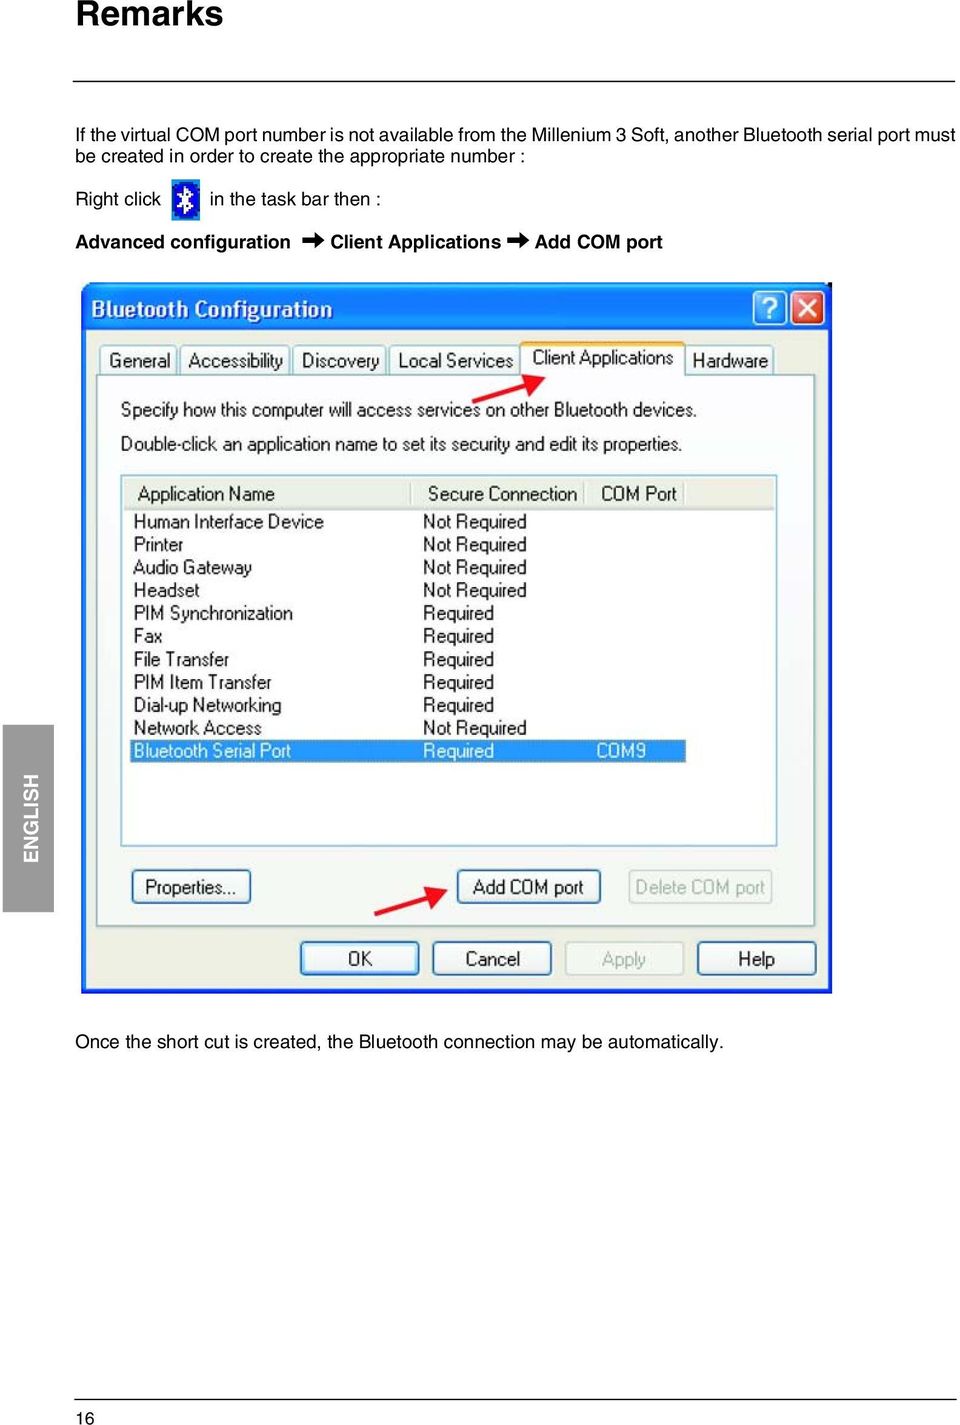 : Right click in the task bar then : Advanced configuration V Client Applications V Add